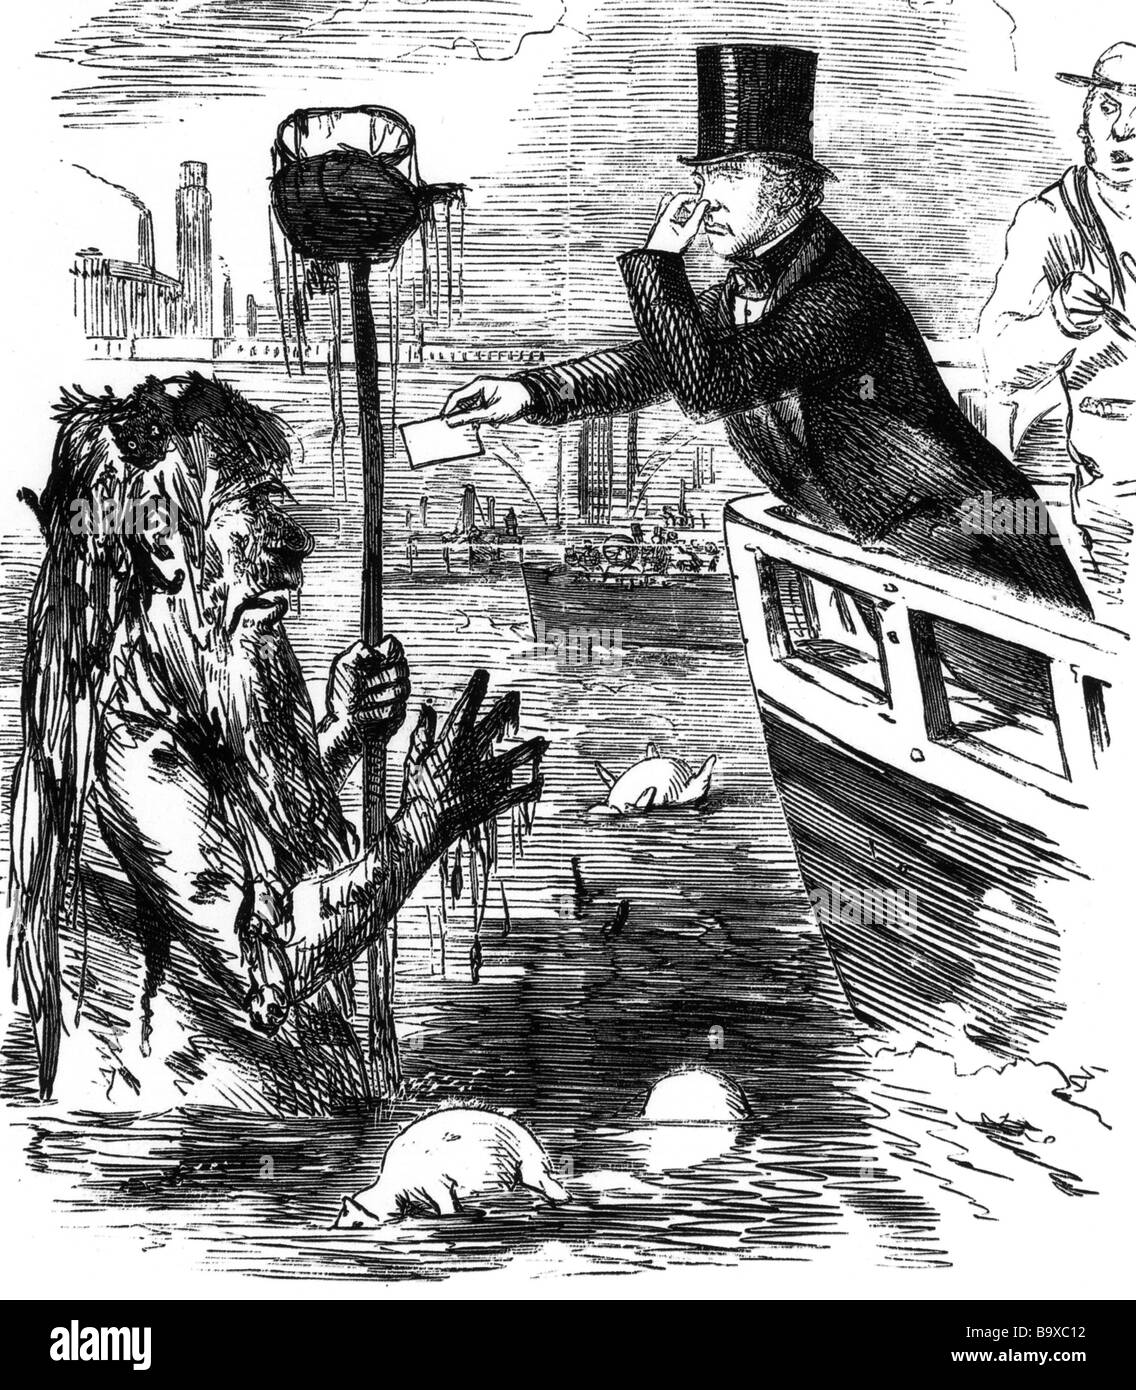 THE FILTHY THAMES Cartoon  shows Michael Faraday giving his calling card to Father Thames - see Description below for details Stock Photo